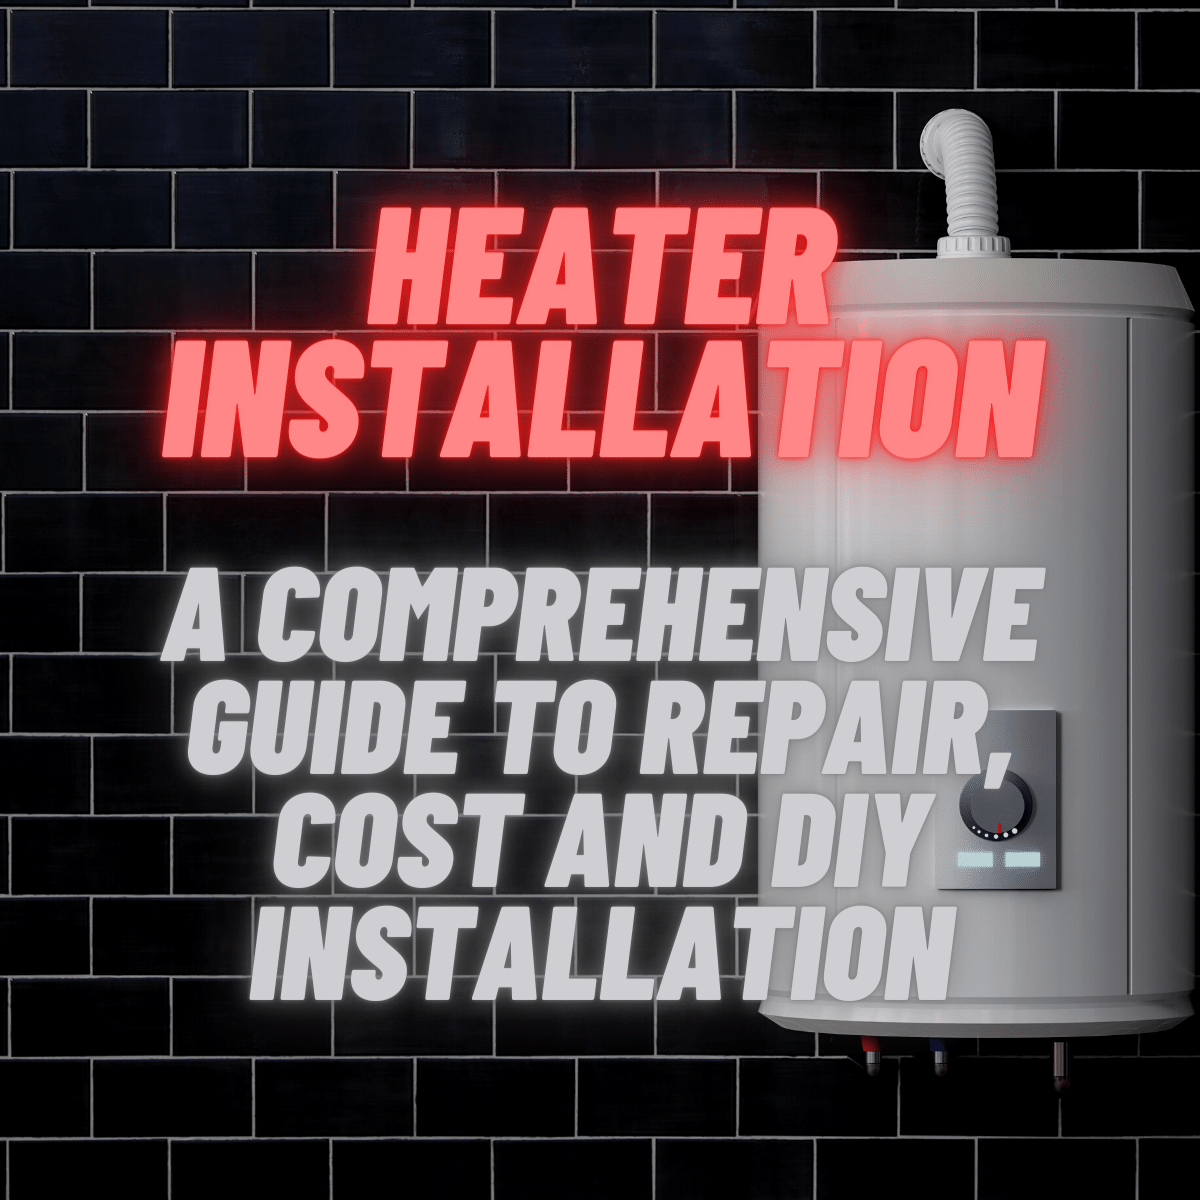 Heater Installation: A Comprehensive Guide to Repair, Cost and DIY Installation